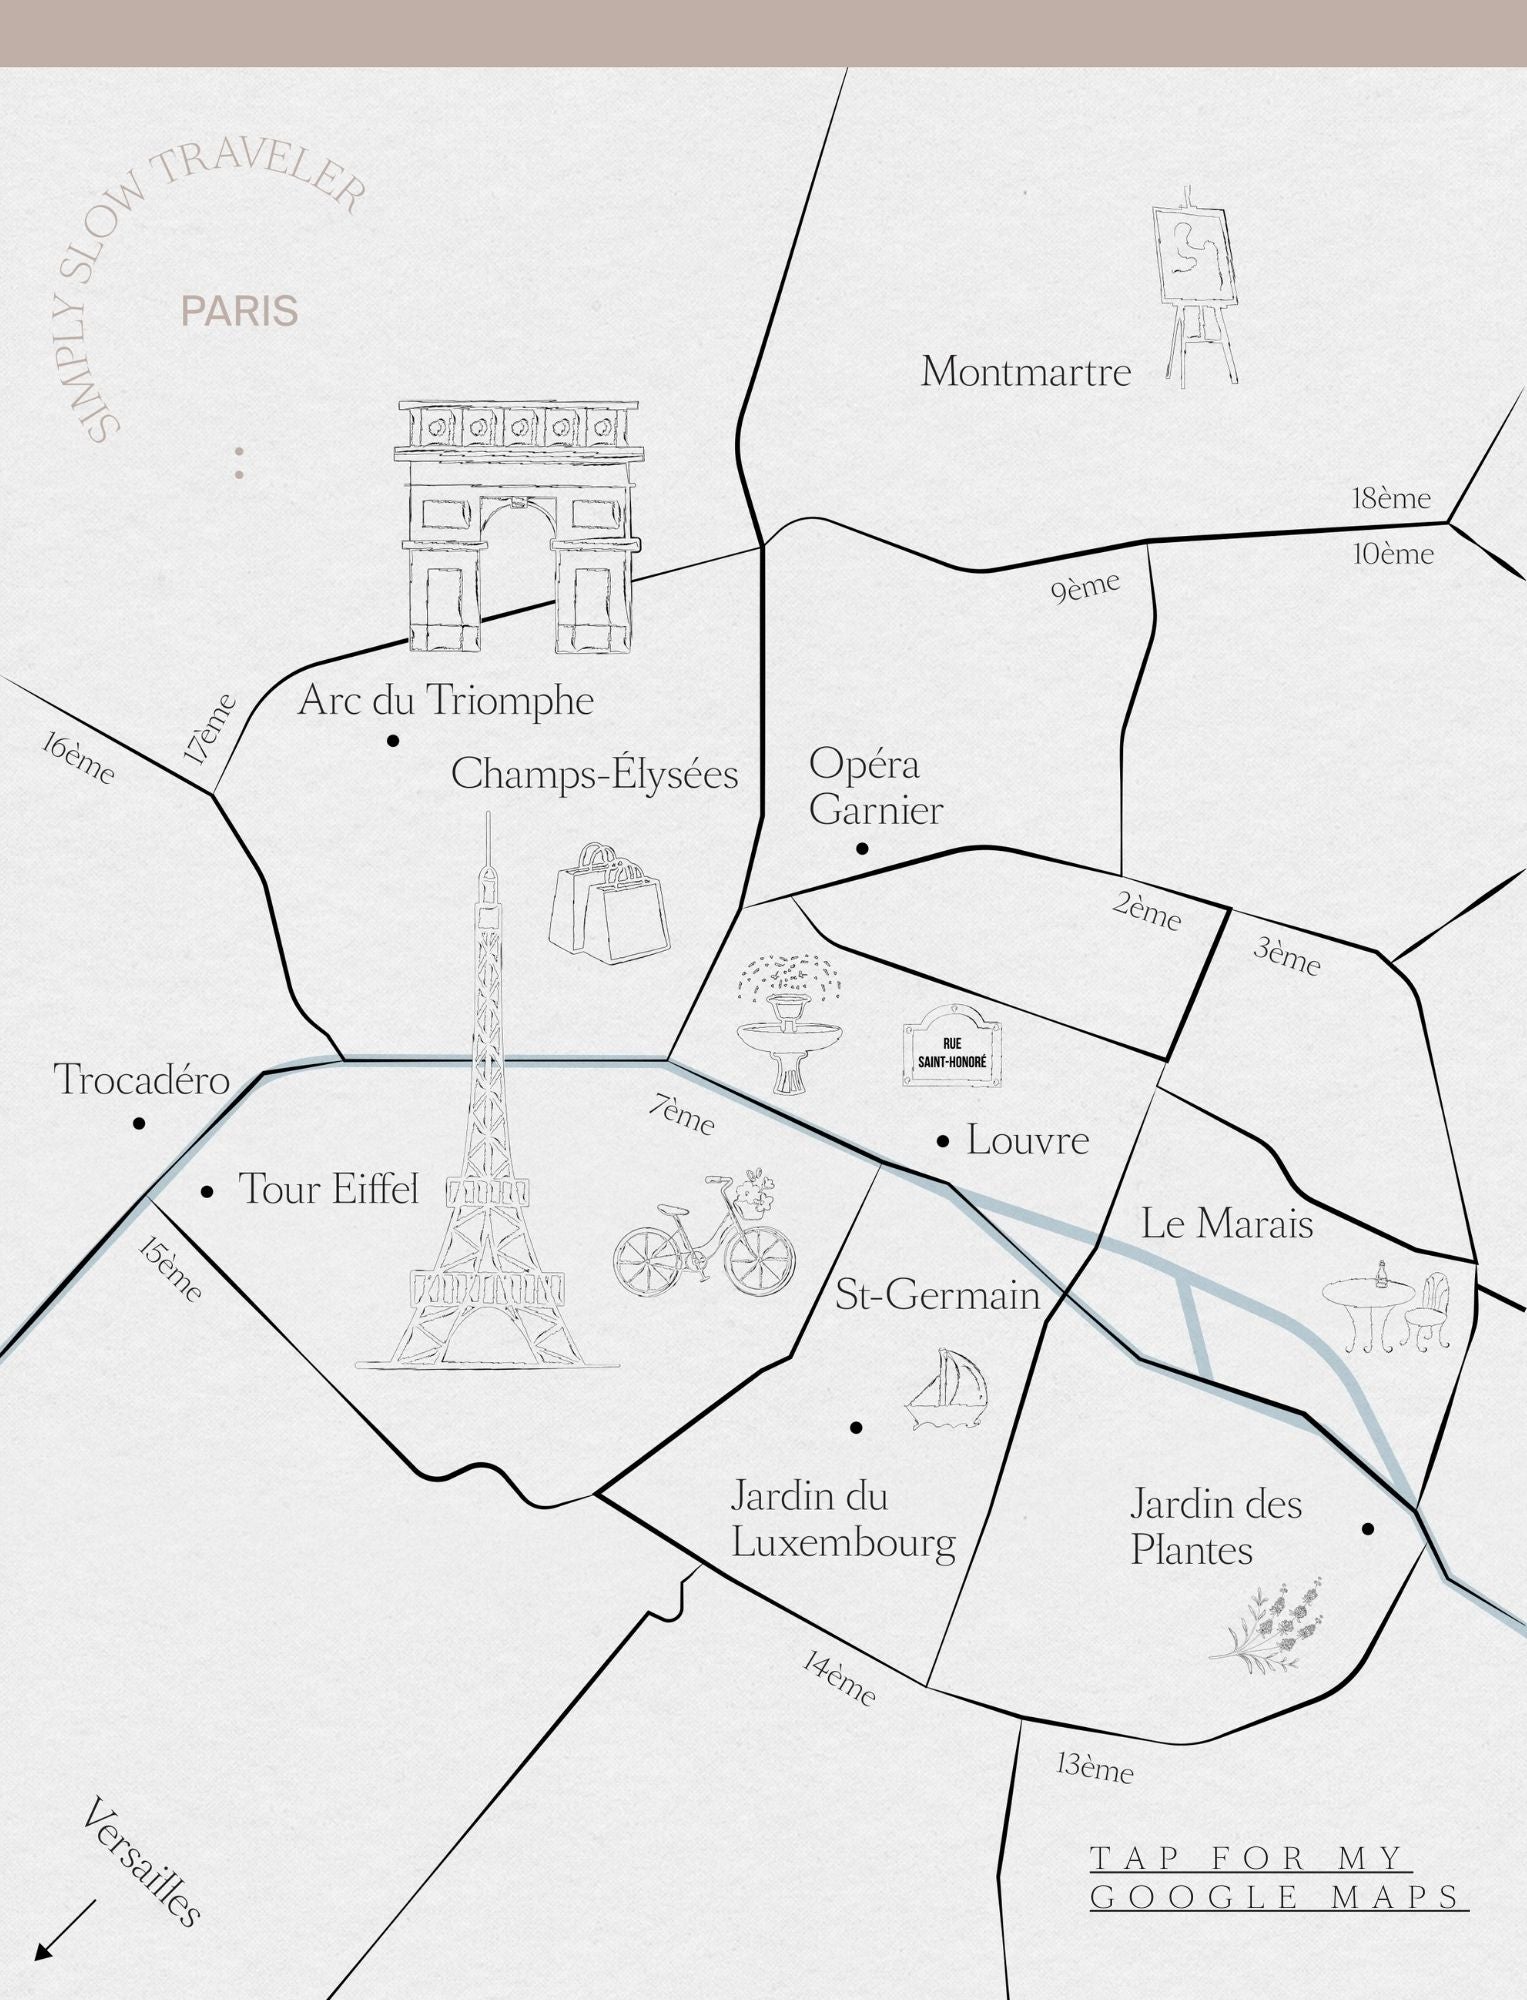 A Guide to Paris - the map of Paris, by Simply Slow Traveler